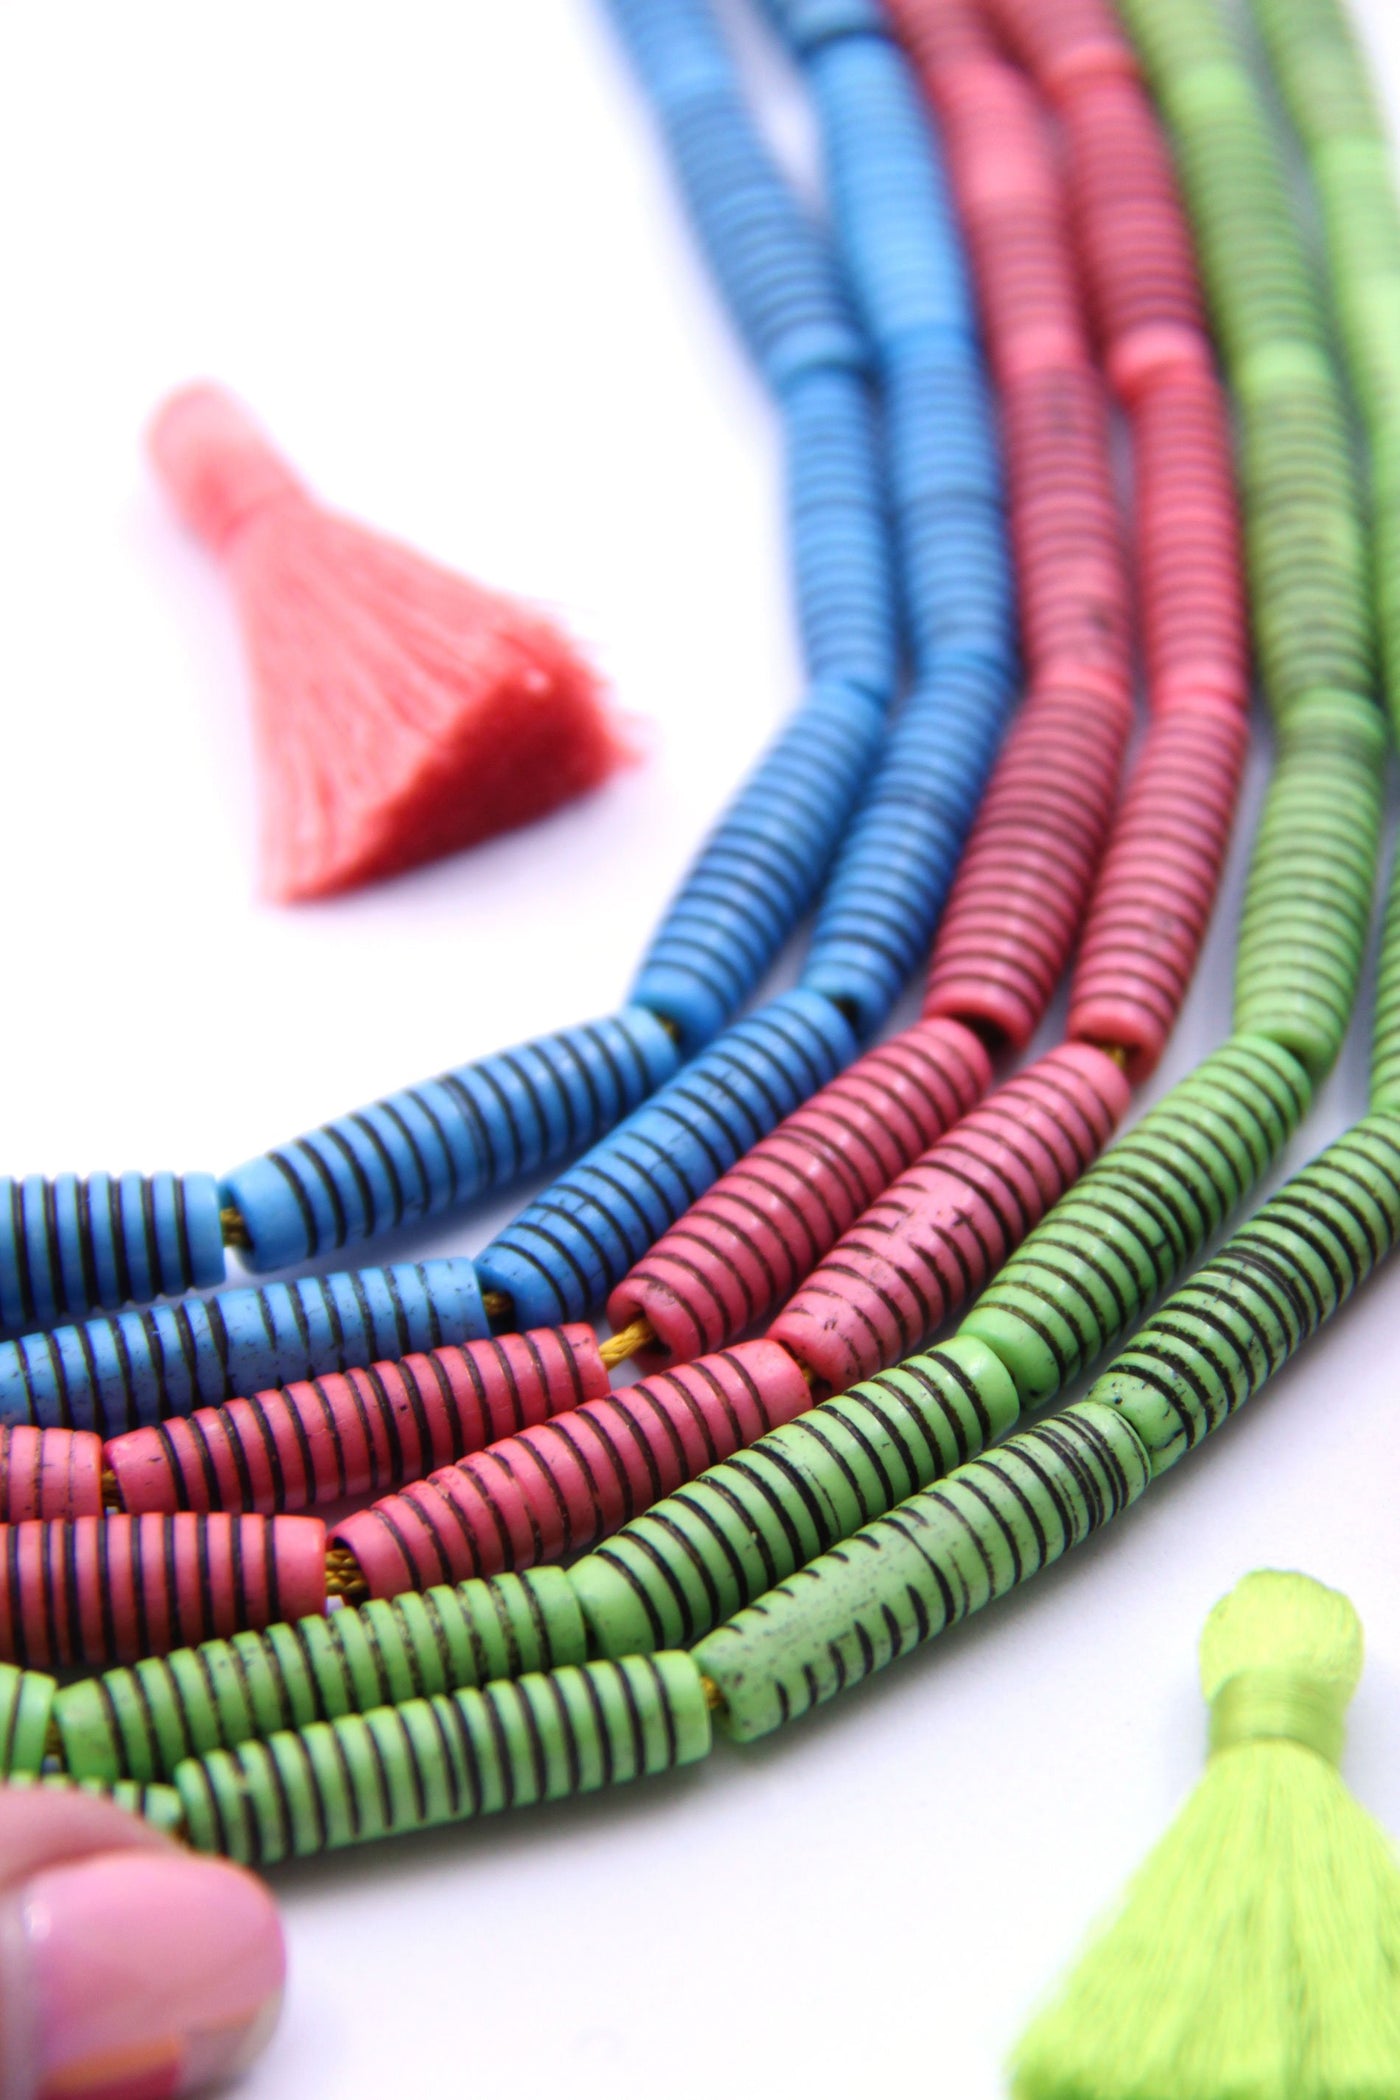 Grooved Barrels: Hand Carved Tube Shape Bone Beads, 5x25mm Spacers, Mala & Jewelry Making Supplies